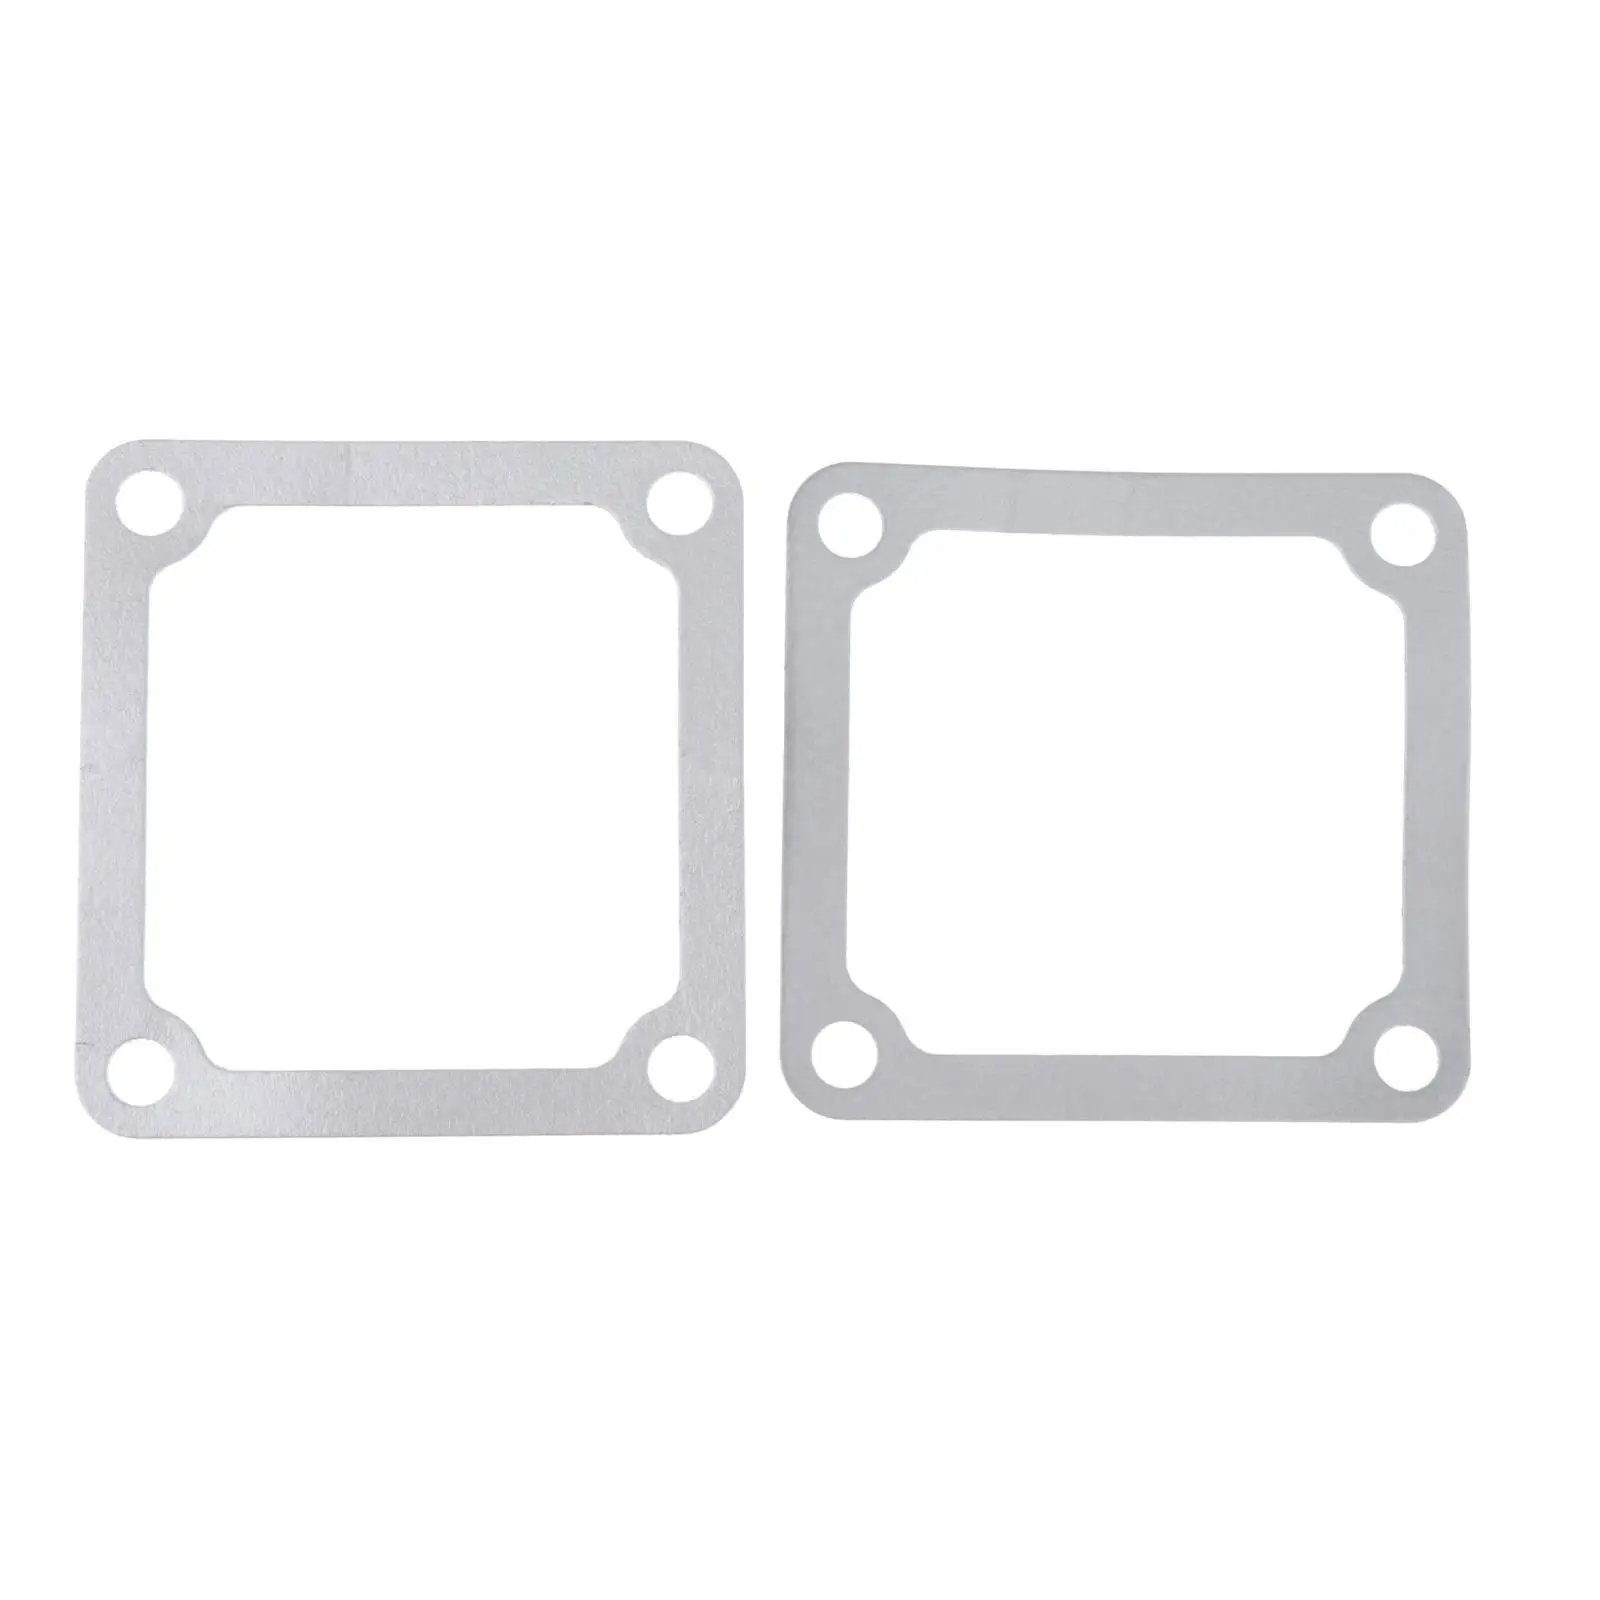 2 Pieces Intake Heater Grid Gaskets Auto Parts Accessory 5.9L Strong Sealing